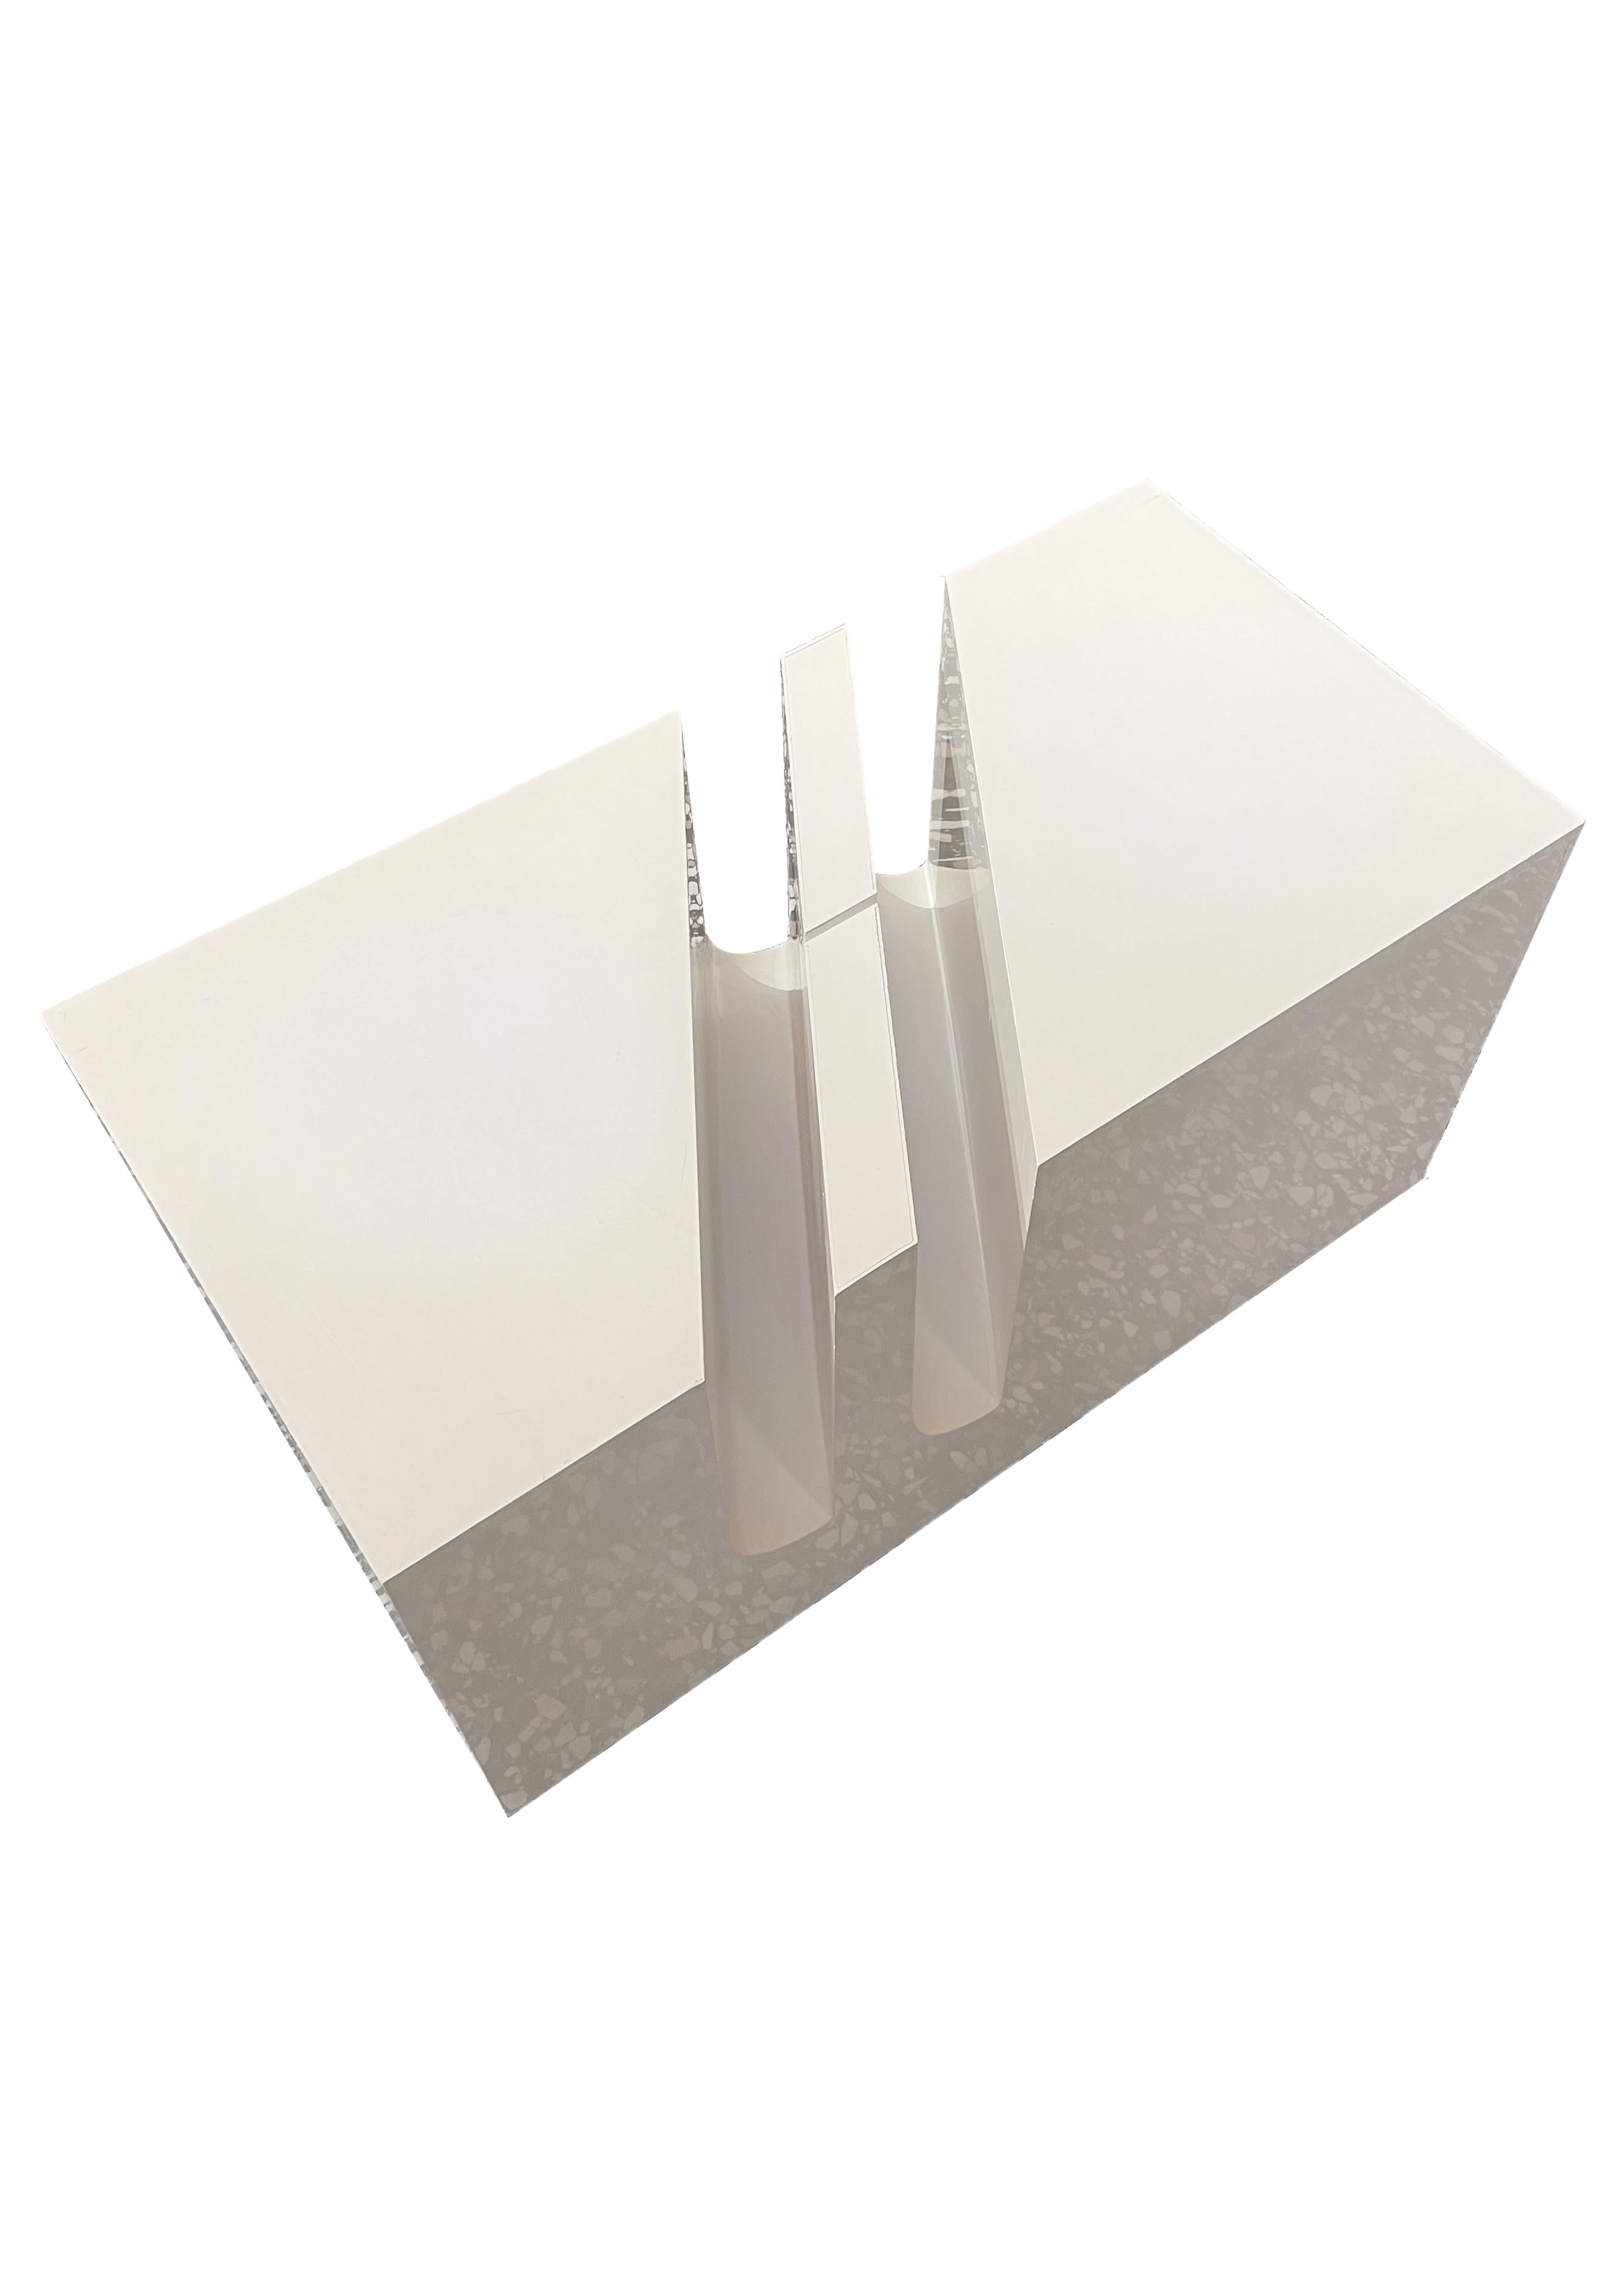 Beautiful coffee table with graphic storage for magazines, in white plastic by Marco Zanuso. Nice details of 